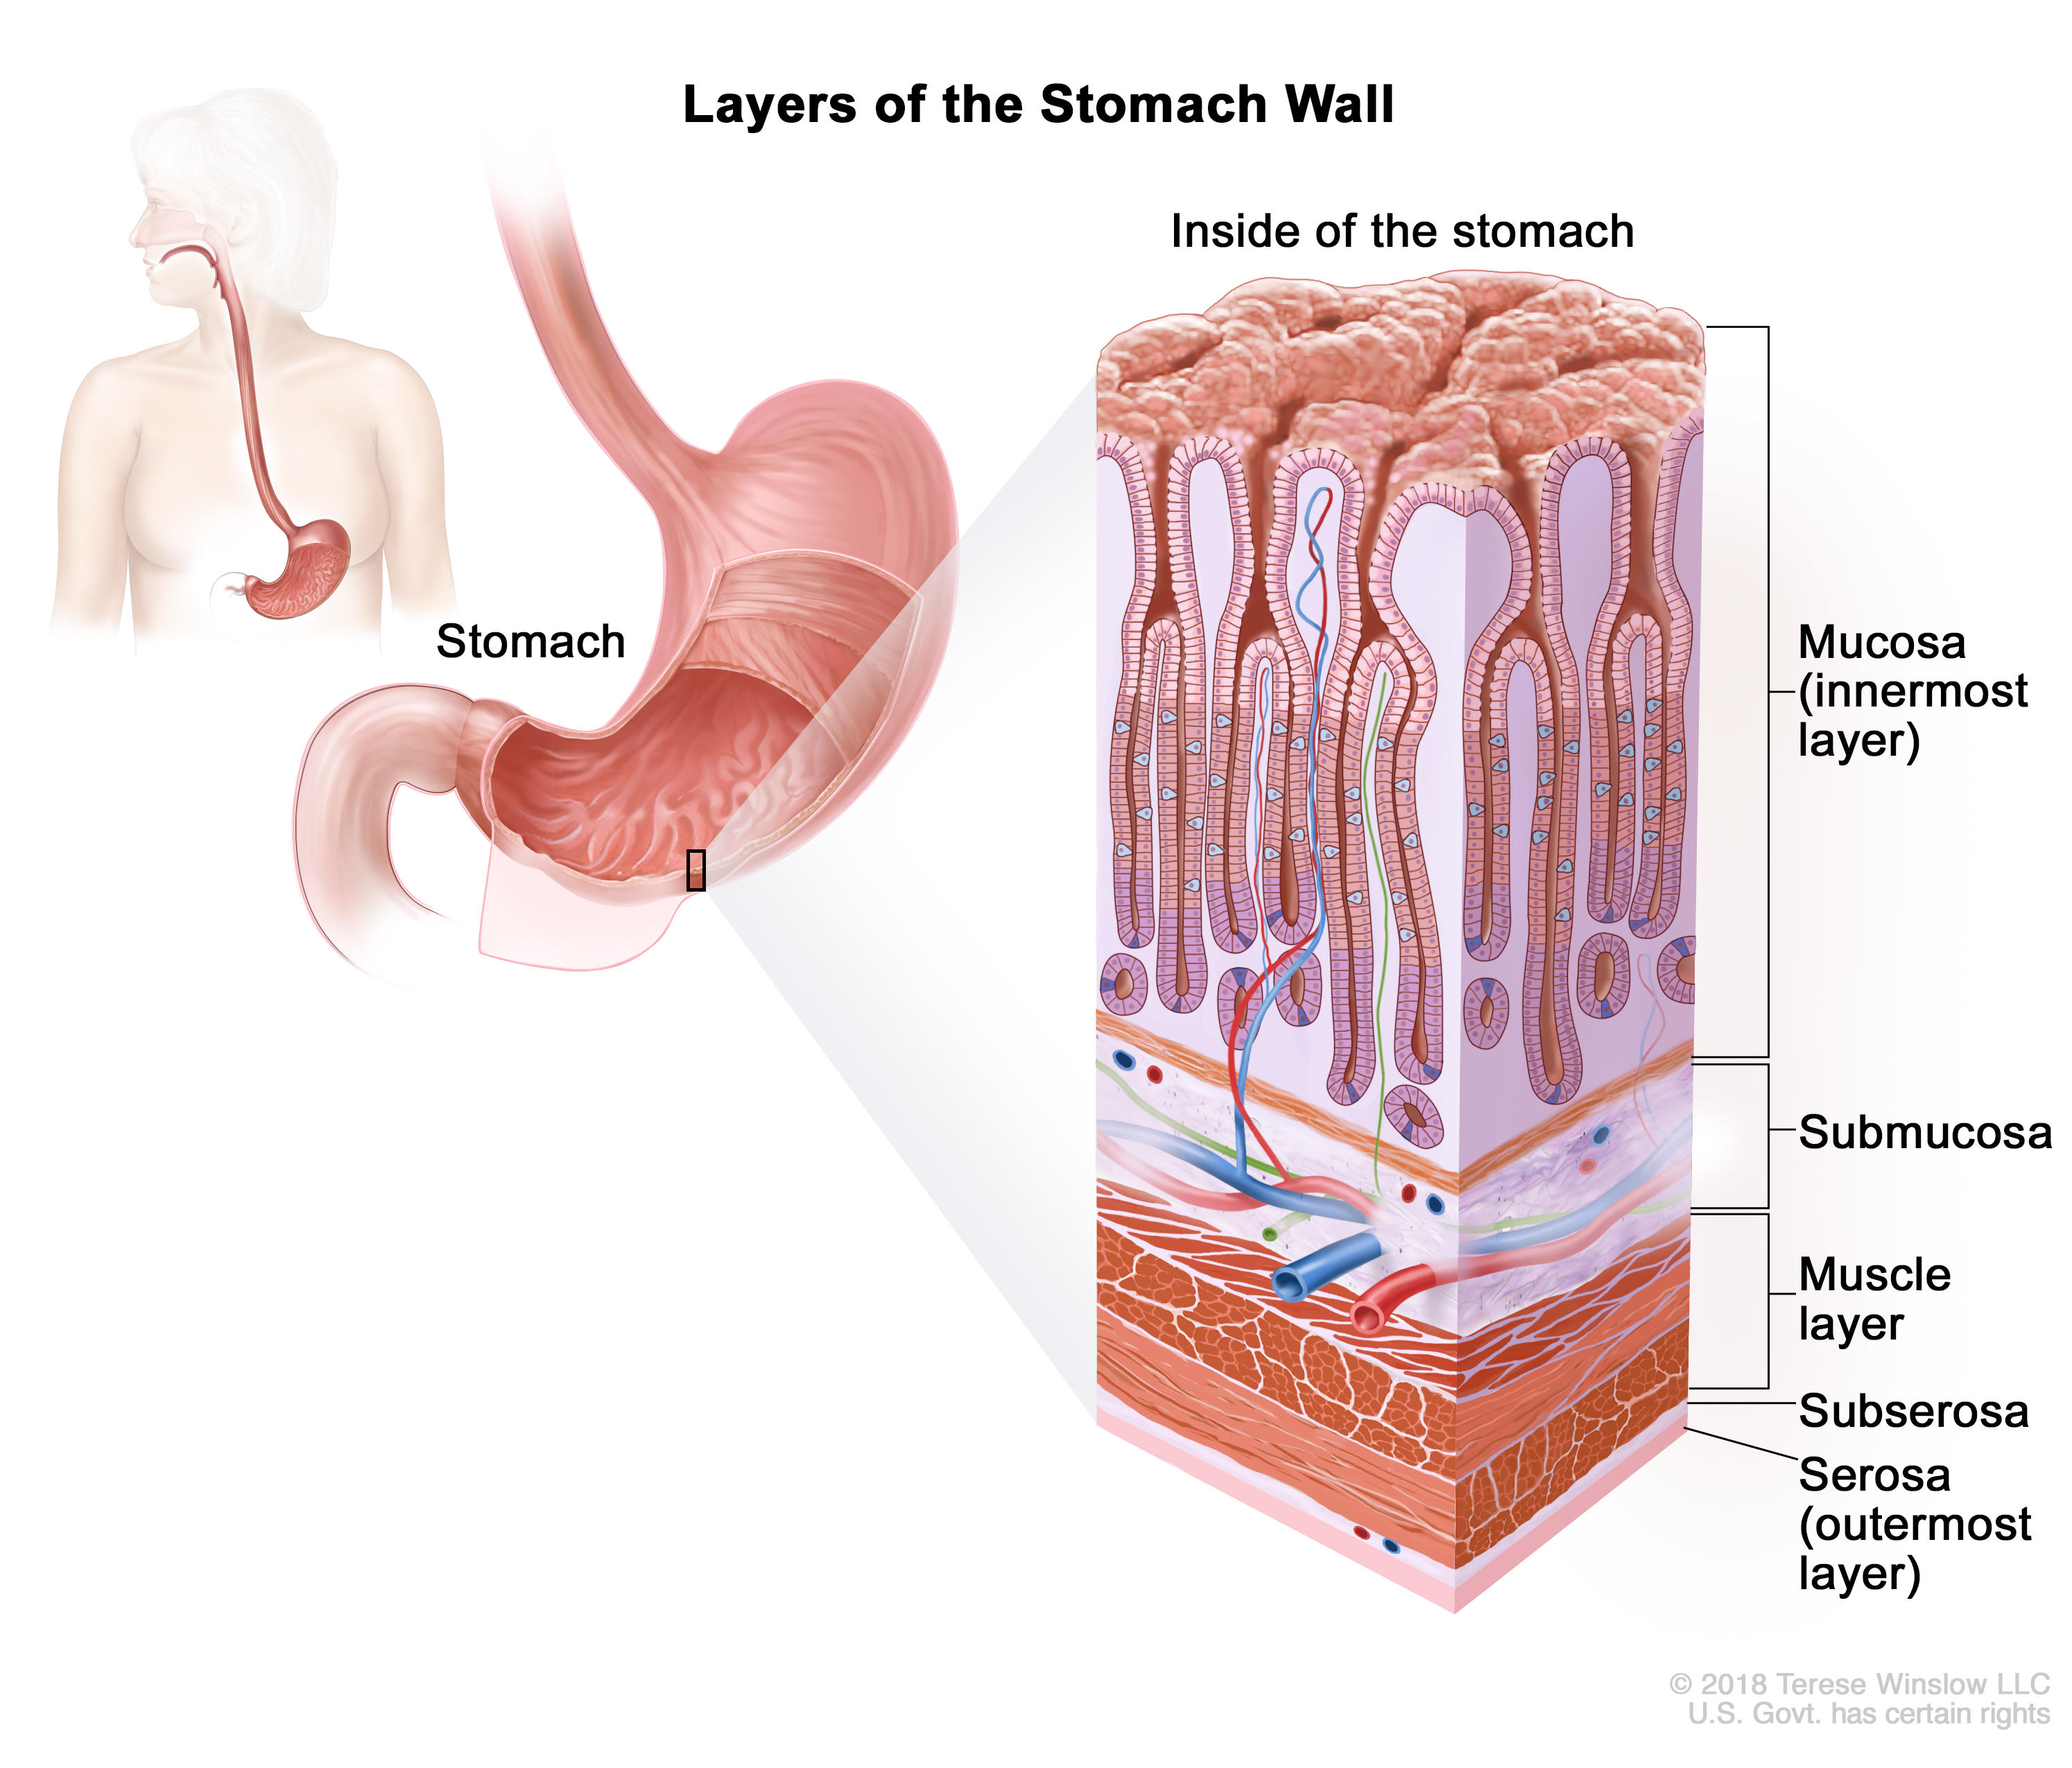 a diagram showing the layers of the stomach wall